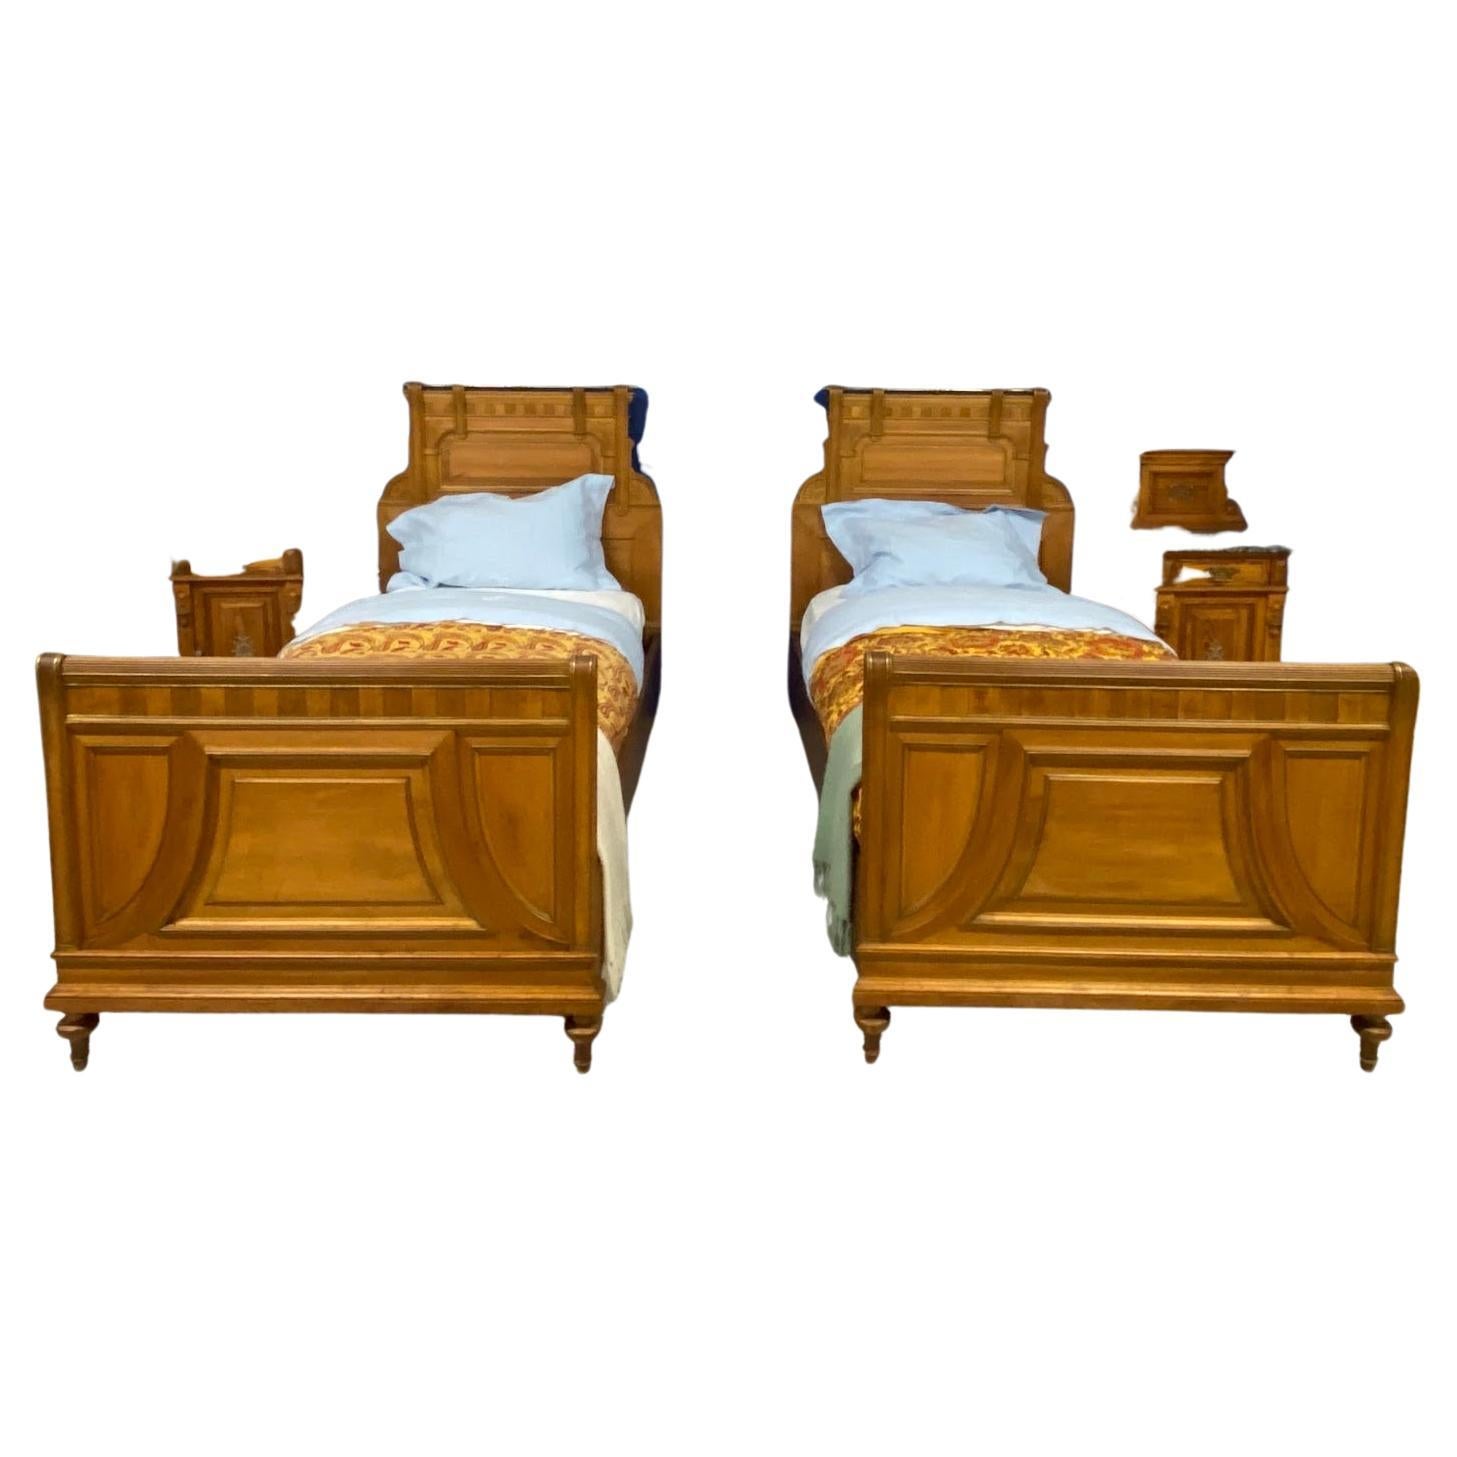 Austrian Decorative Twin Beds Wood For Sale